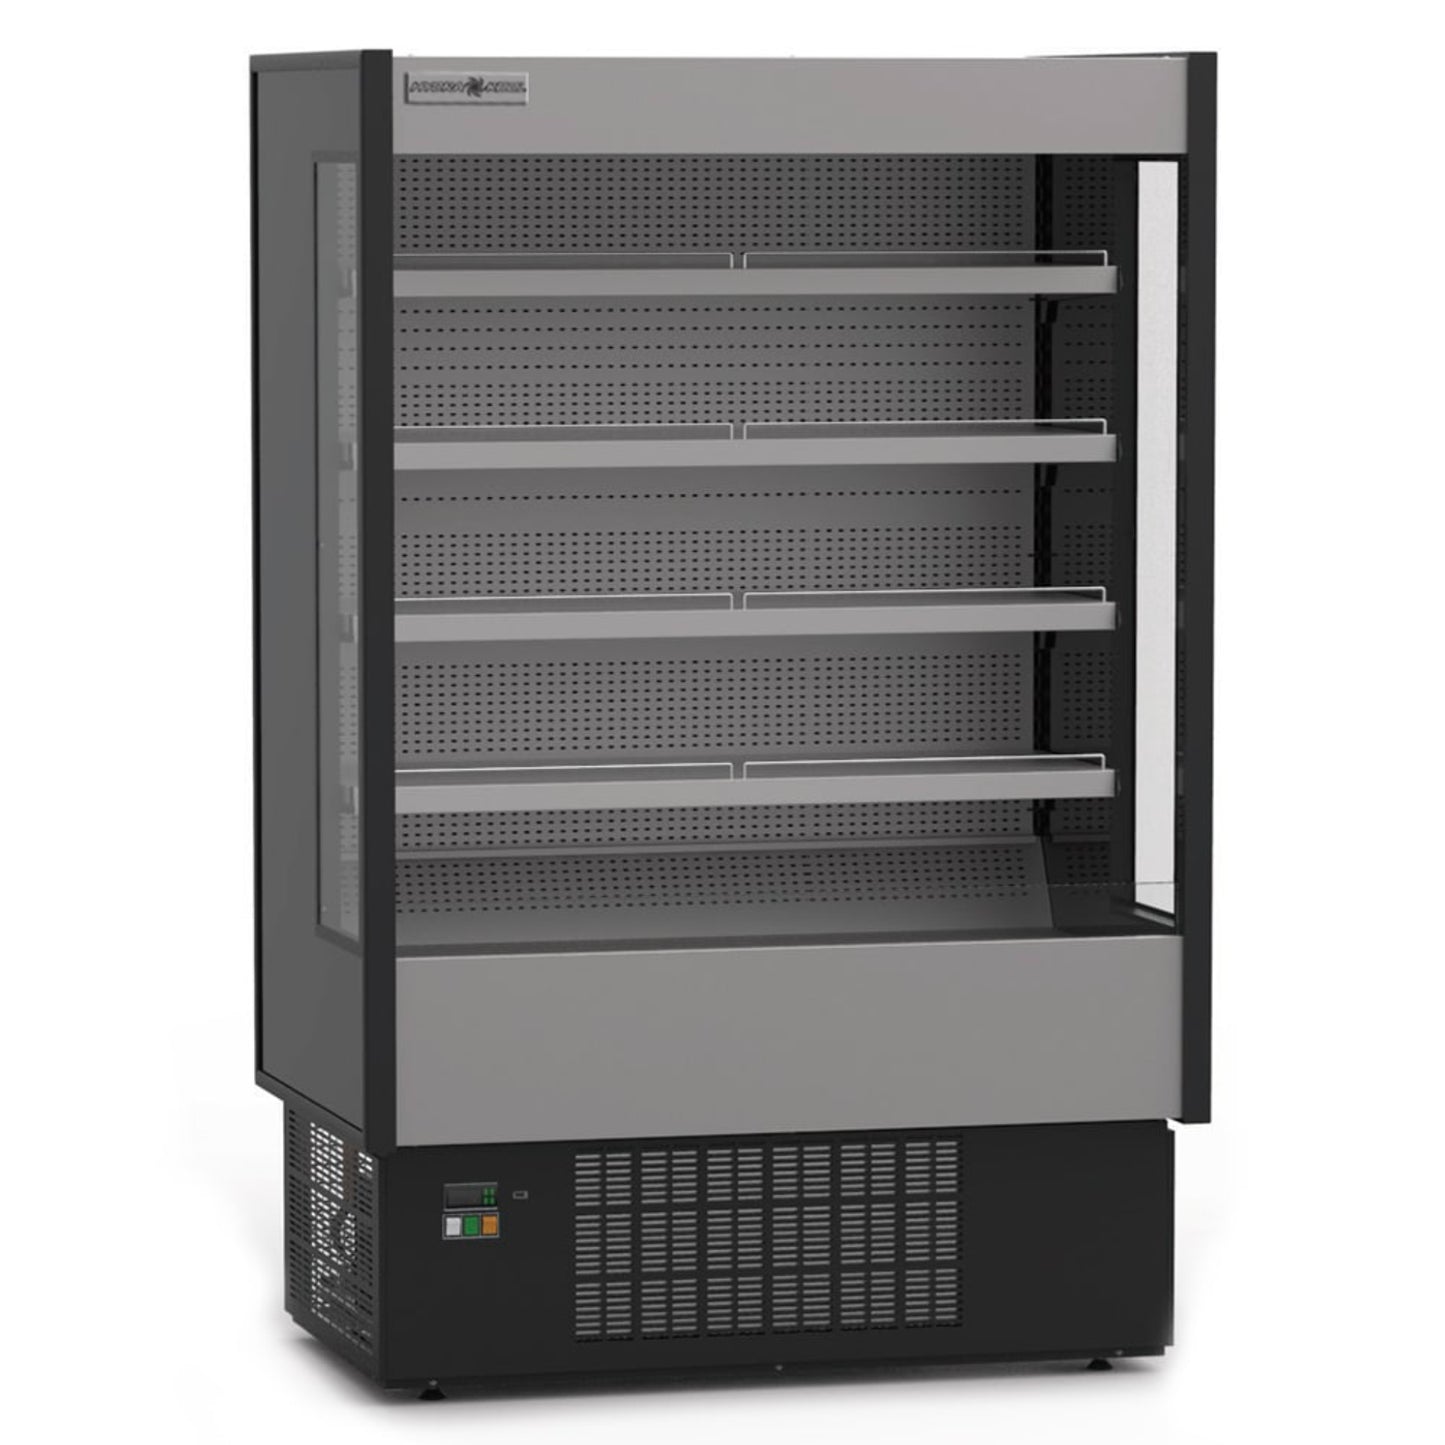 Hydra-Kool KGH-OF-40-S 40" Grab And Go High Profile Self-Contained